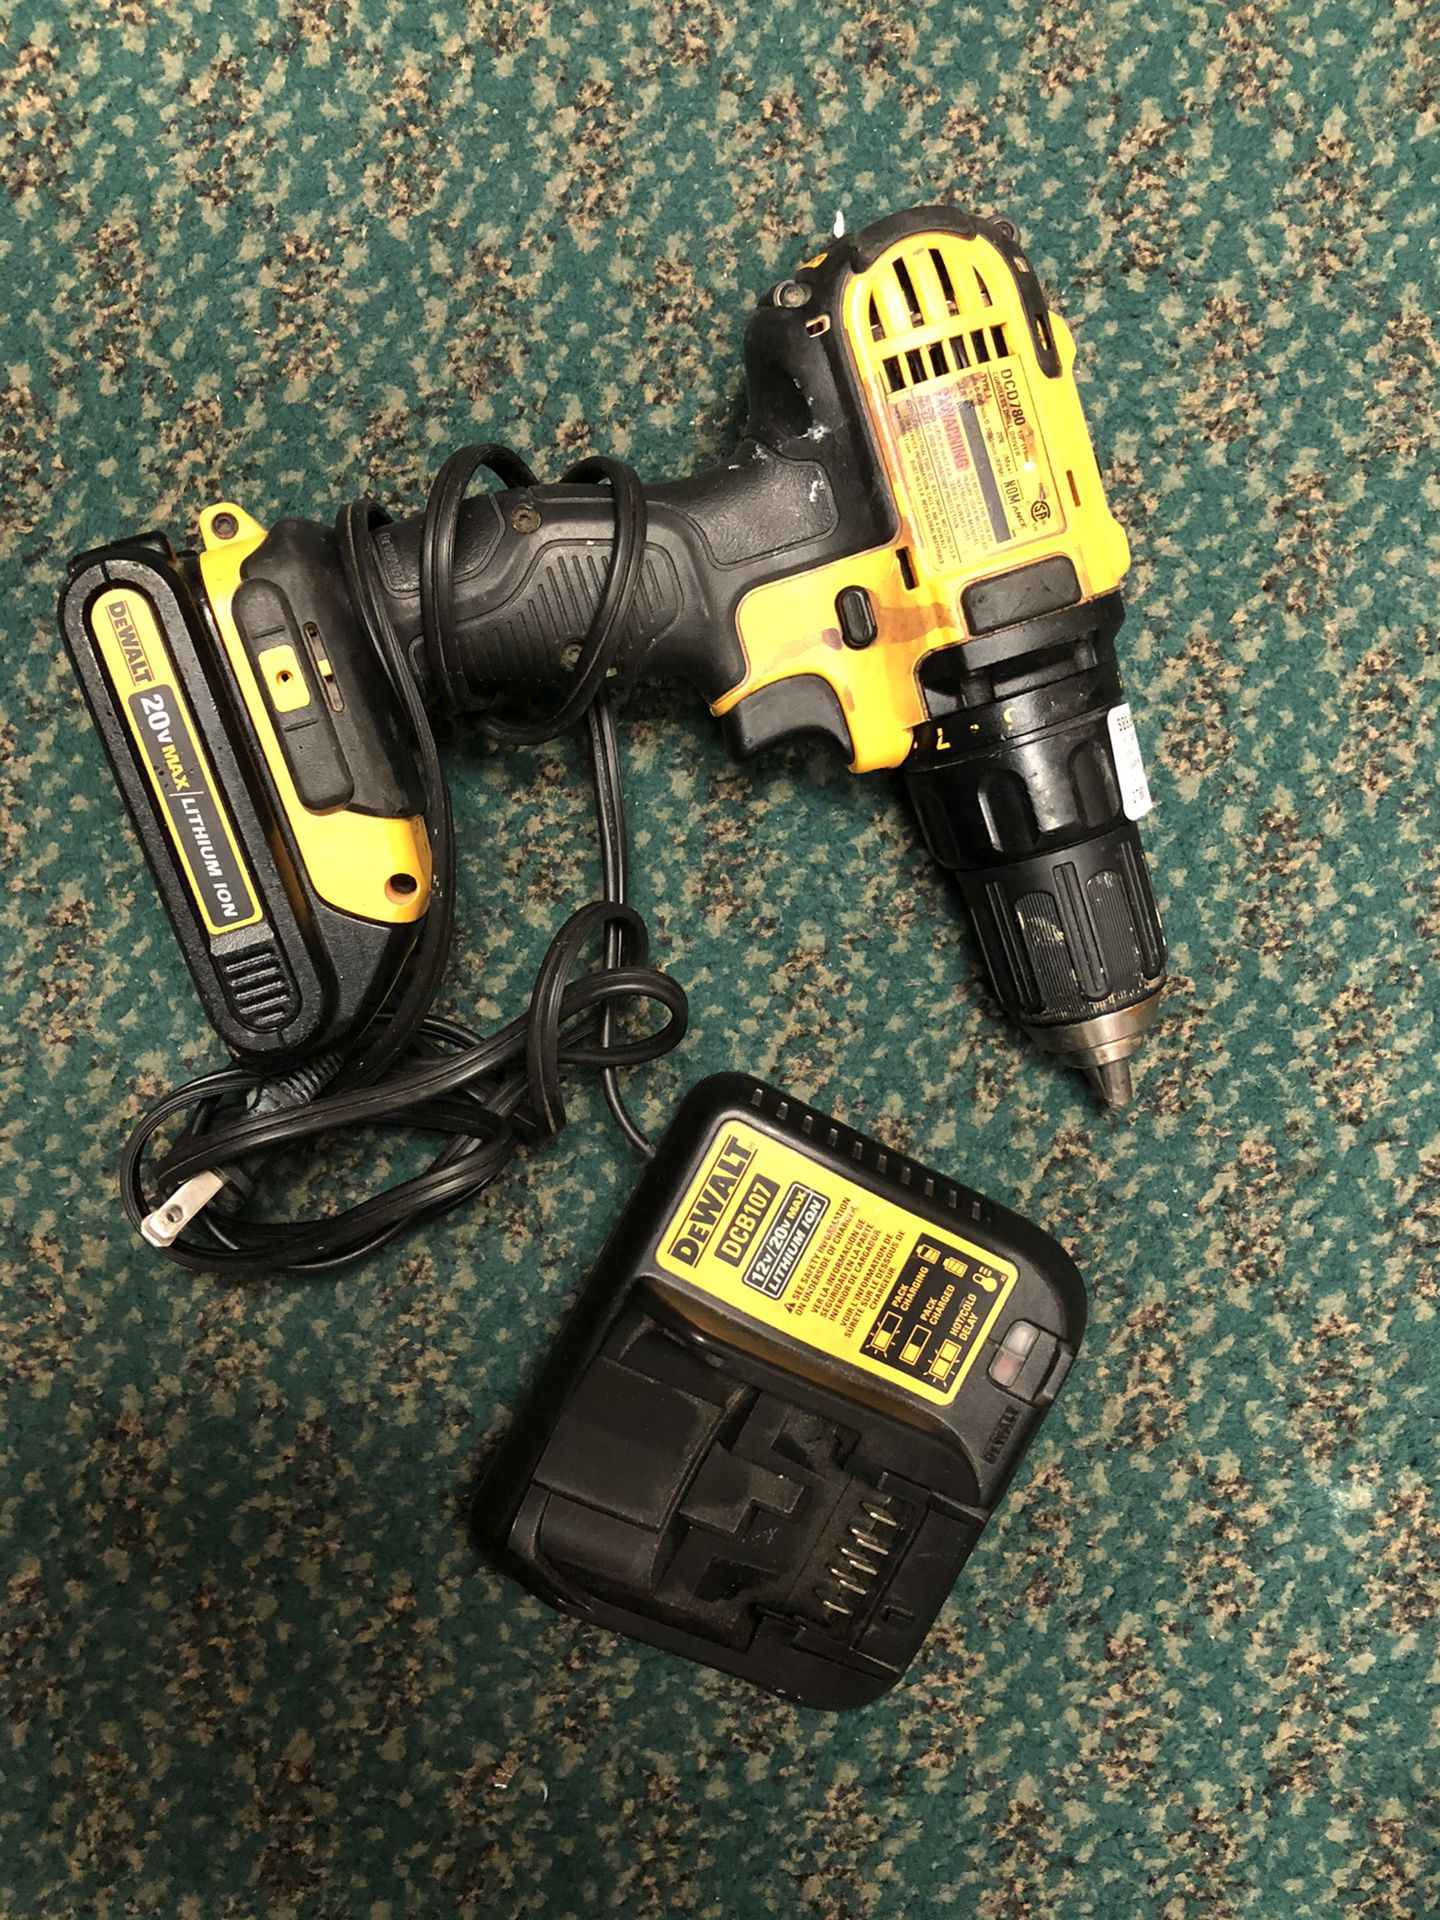 Drill, Tools-Power Dewalt W/Battery & Charger.. Negotiable